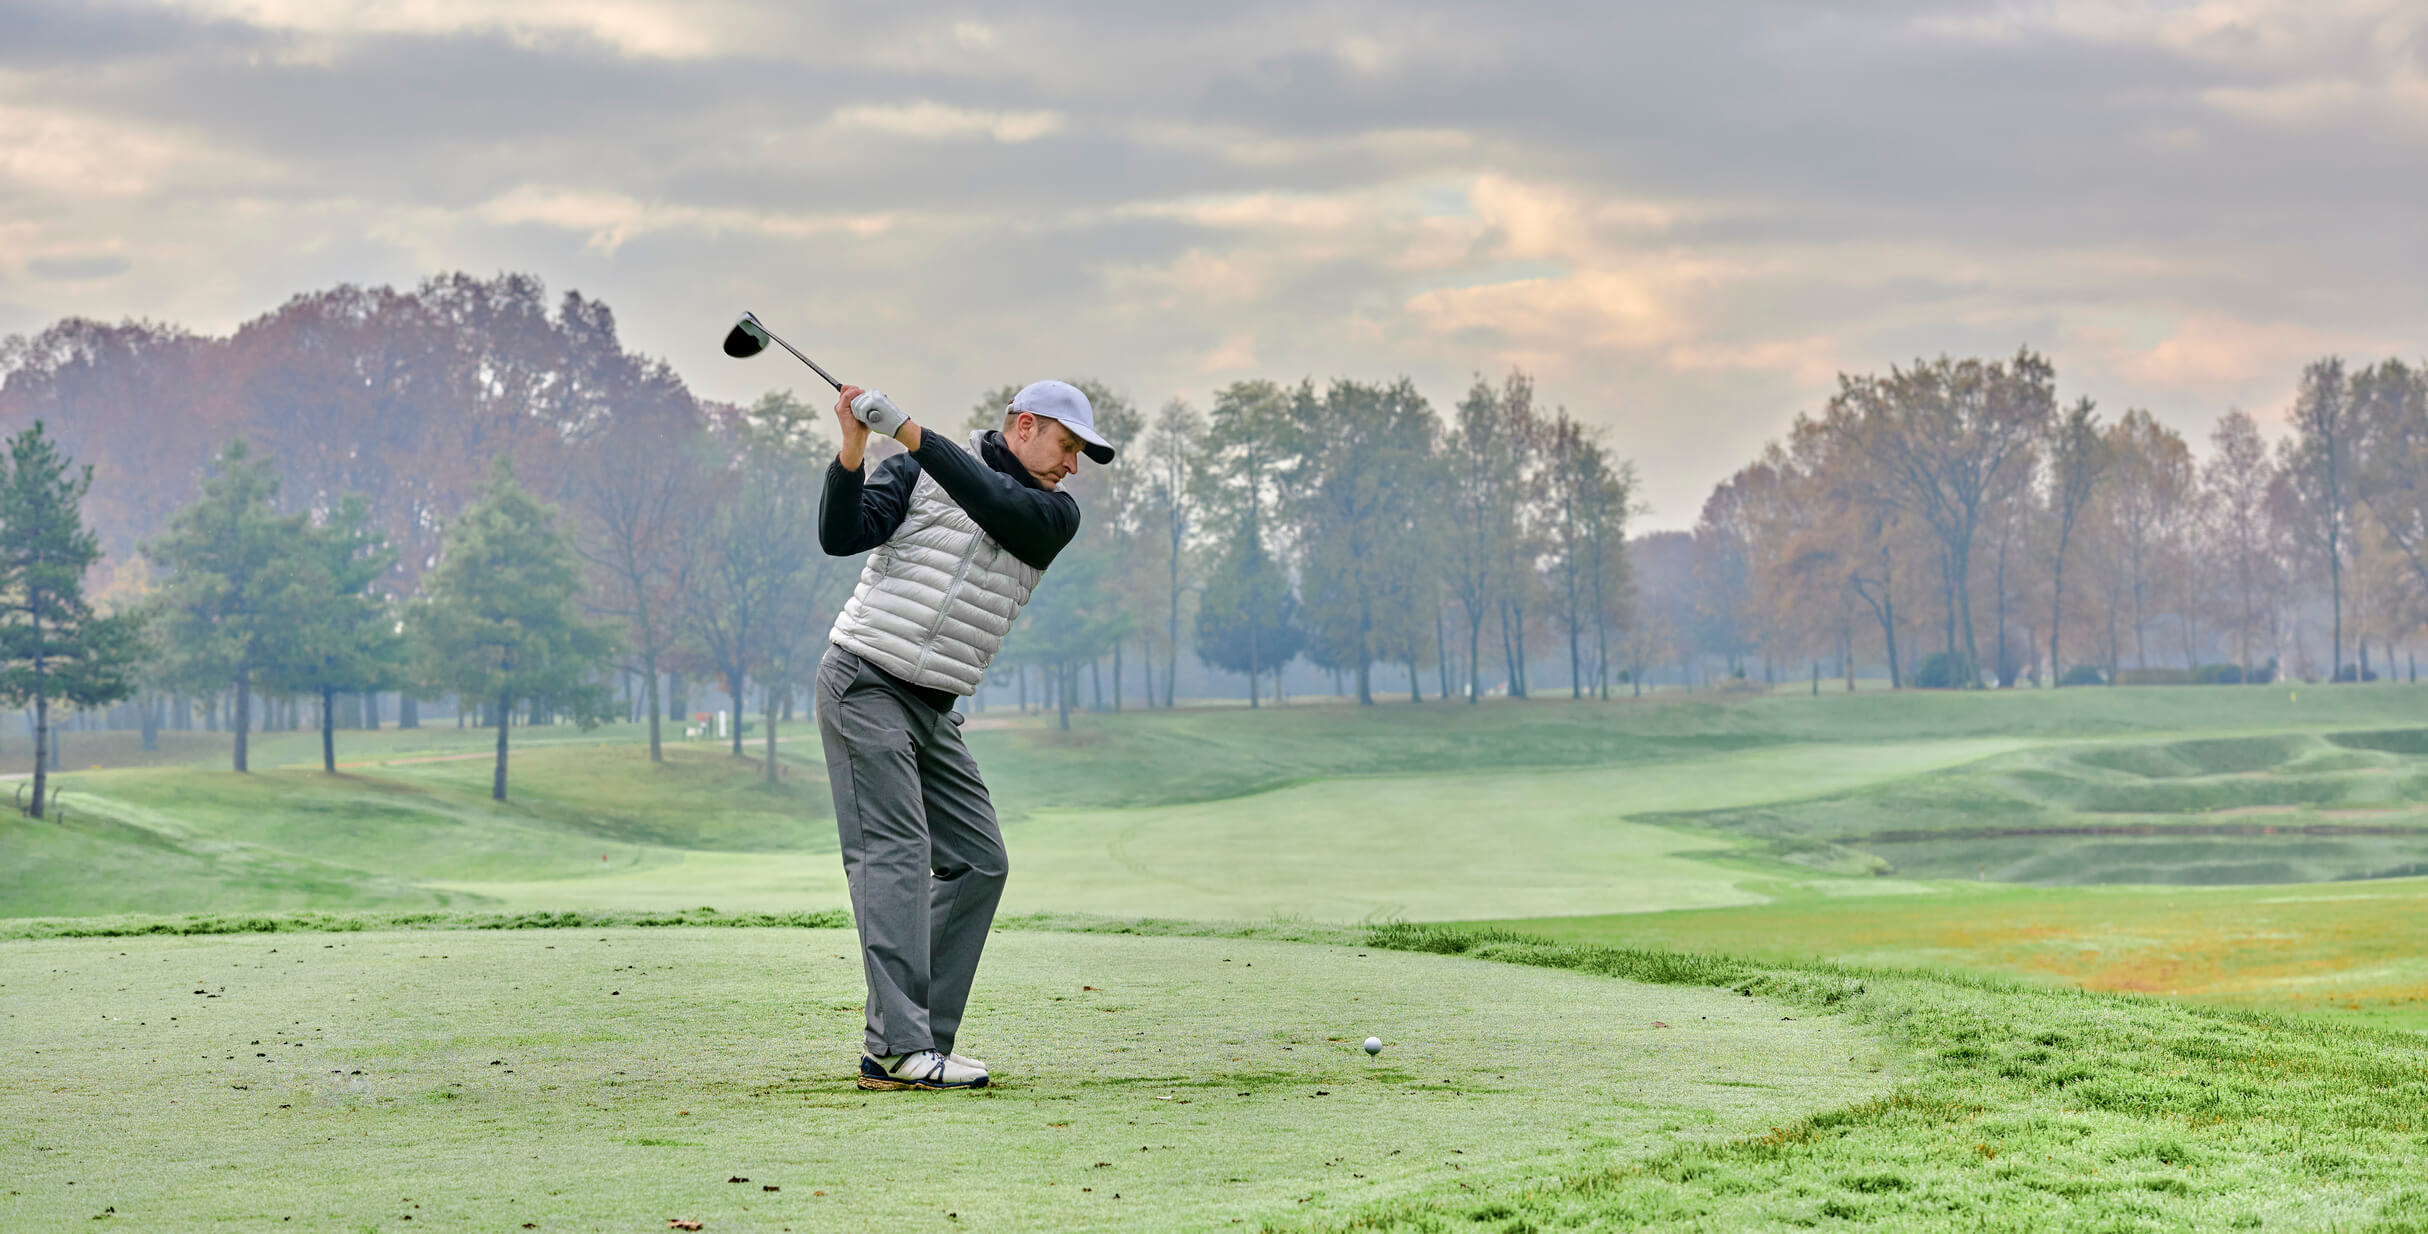 Tips for Golfing in Cold Weather